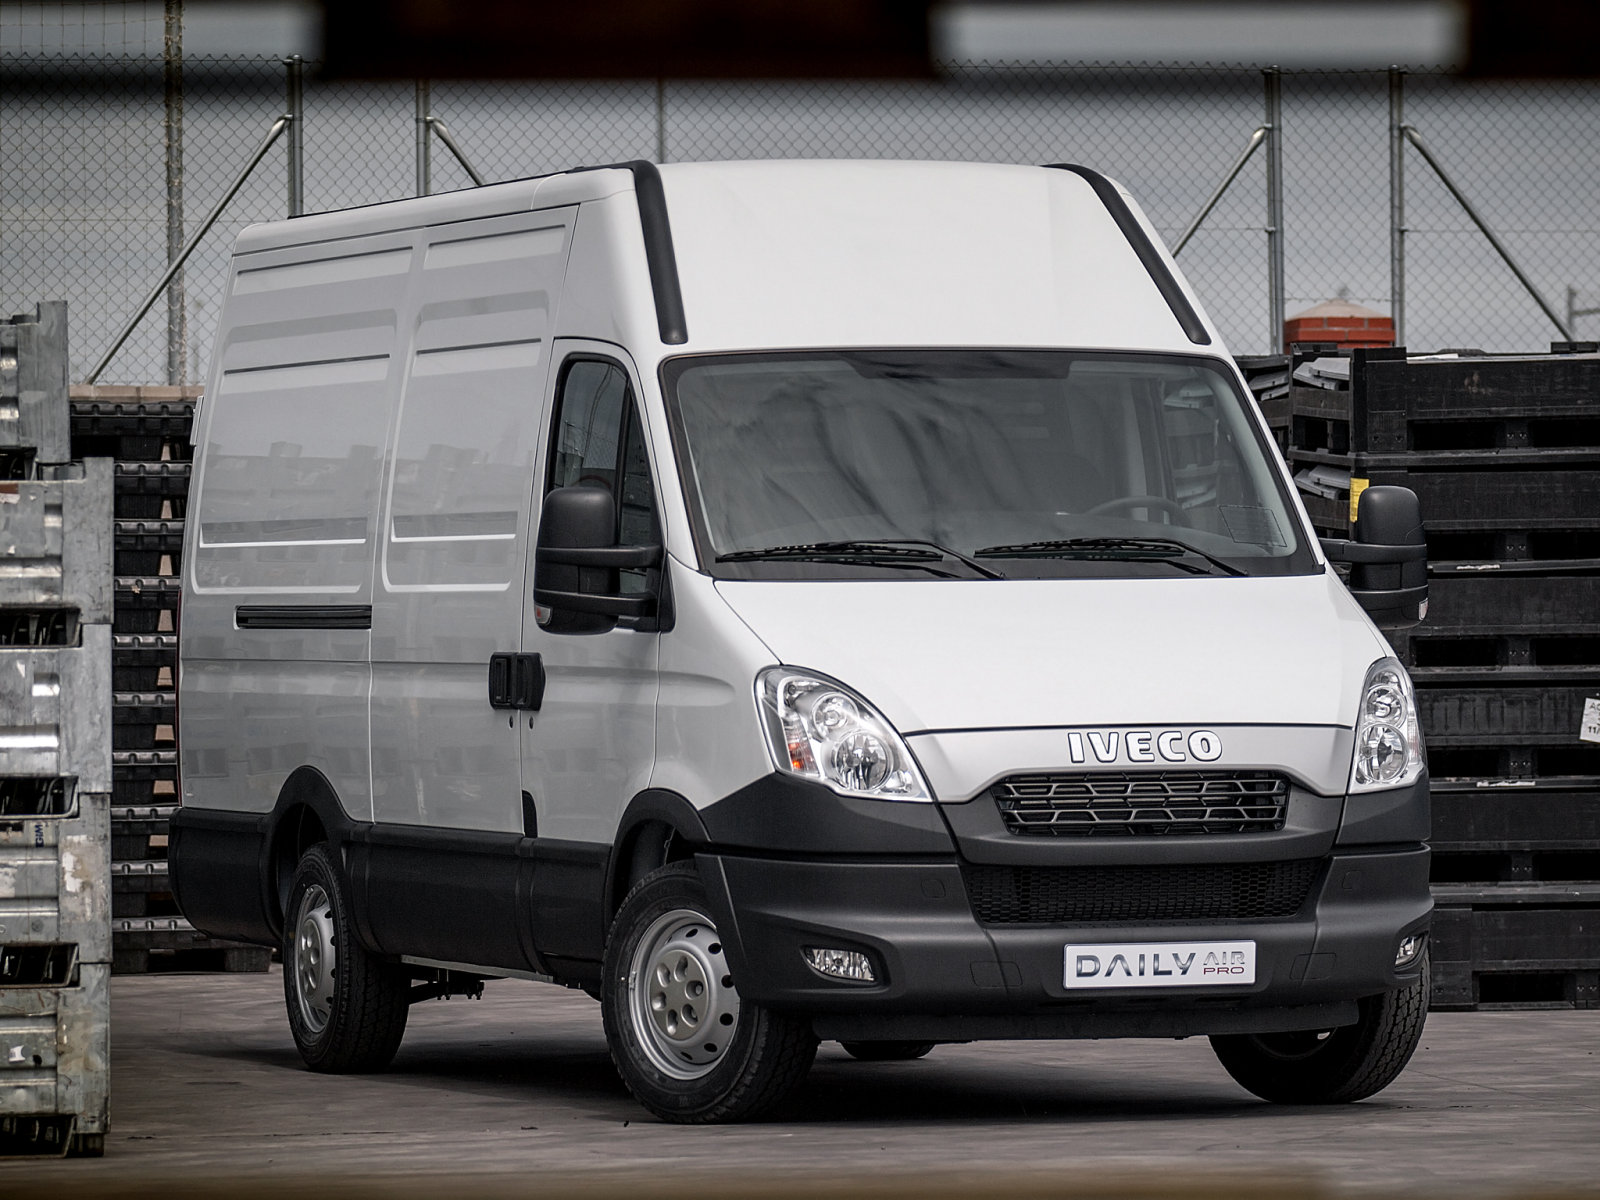 All-New 2014 Iveco Daily Breaks Cover - autoevolution